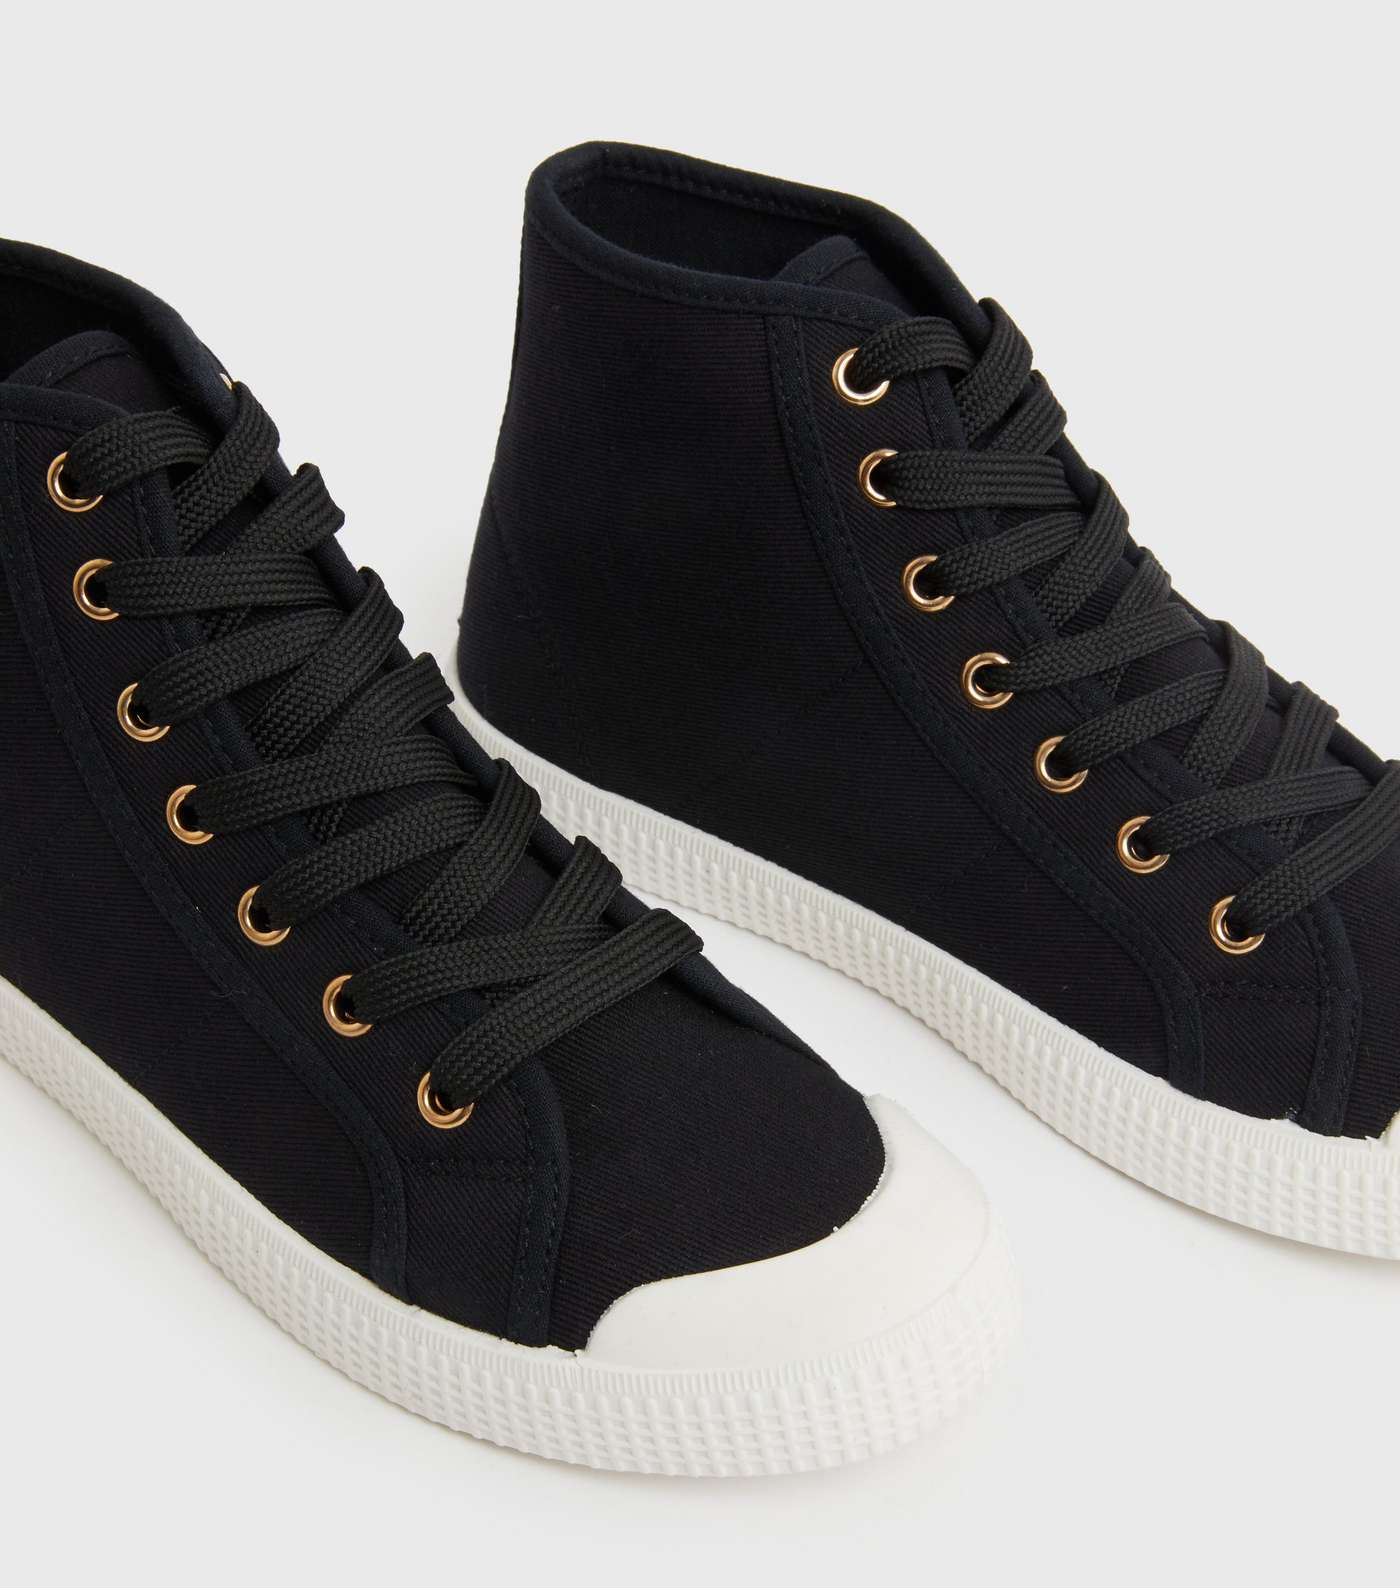 Black Canvas Lace Up High Top Trainers Image 4